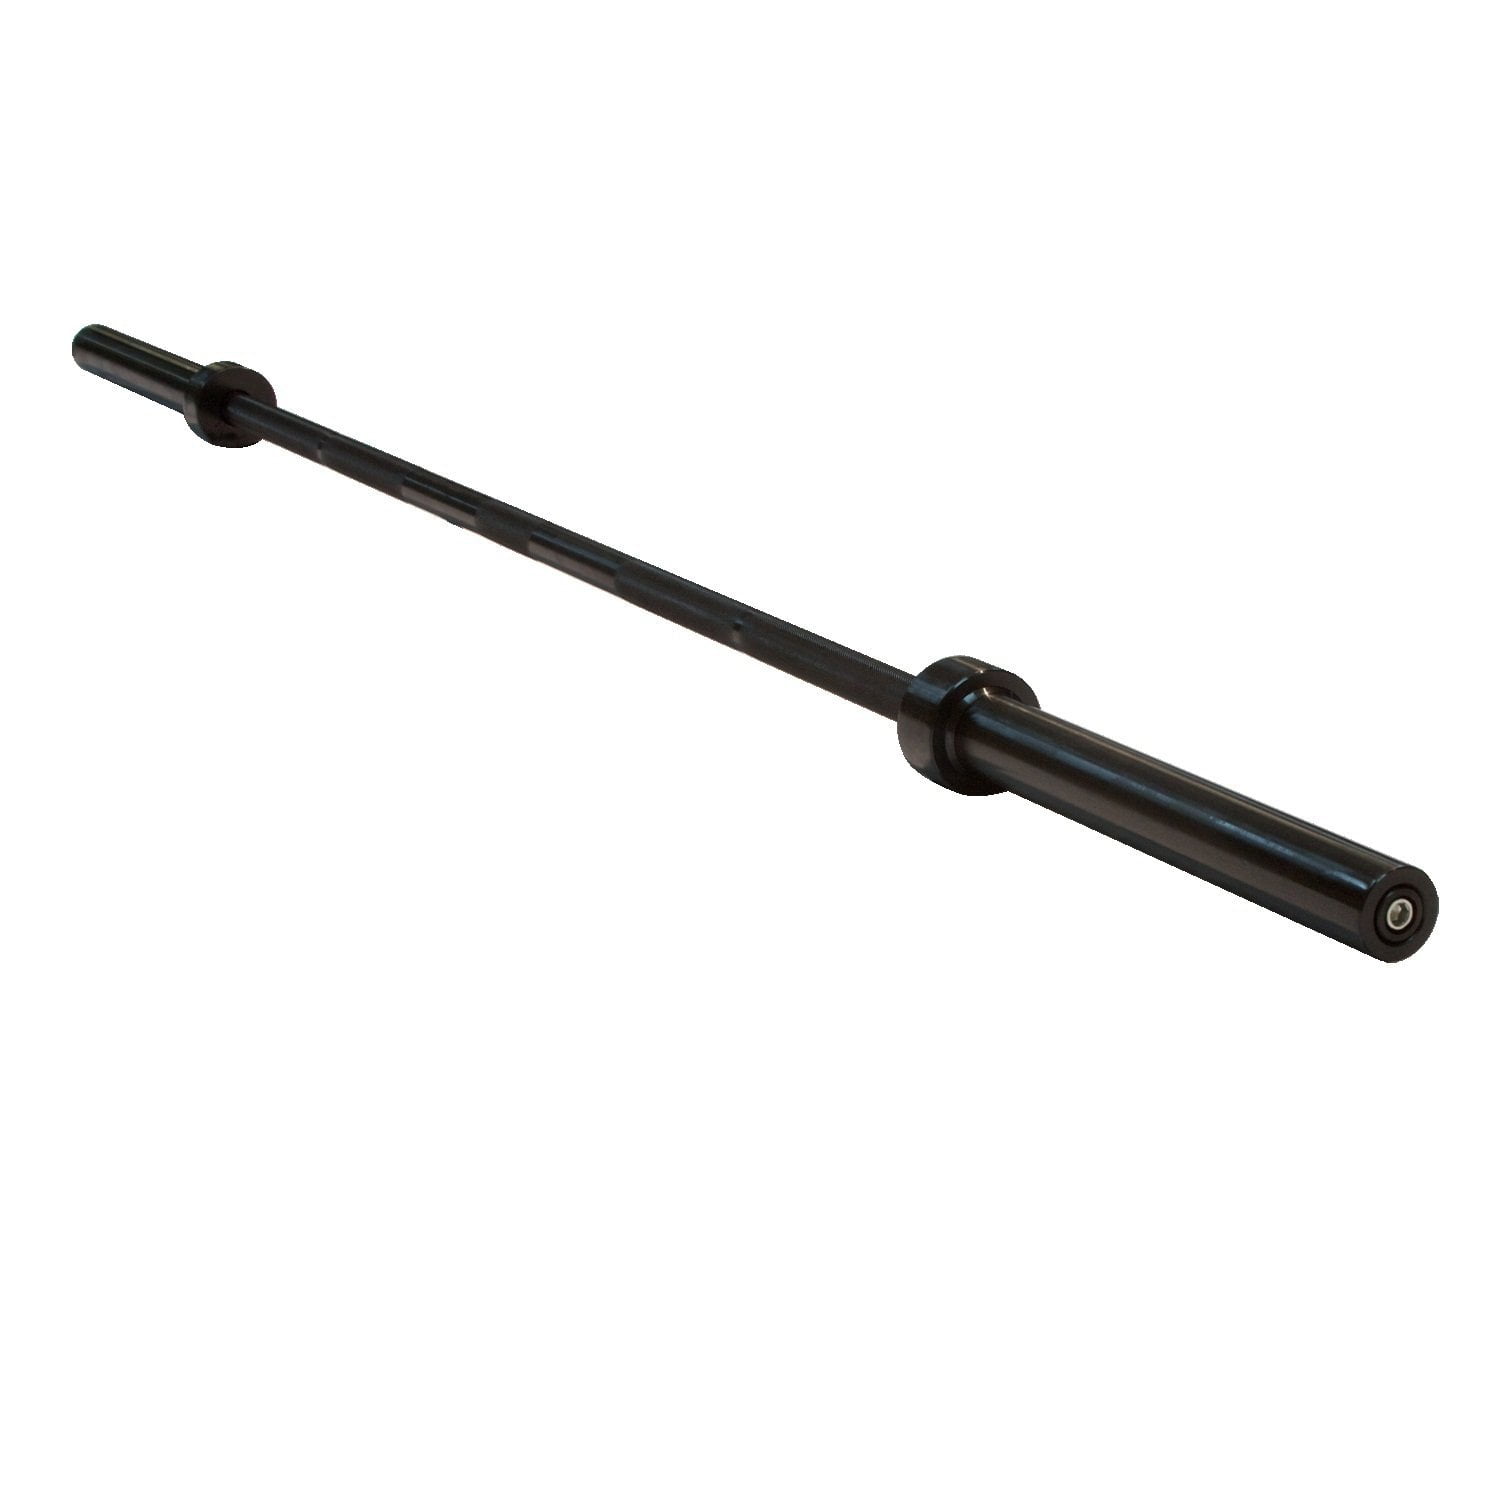 Womens Olympic Bar Barbell Black Oxide 15KG 35 Pound Weightlifting 1000 lb Rated 